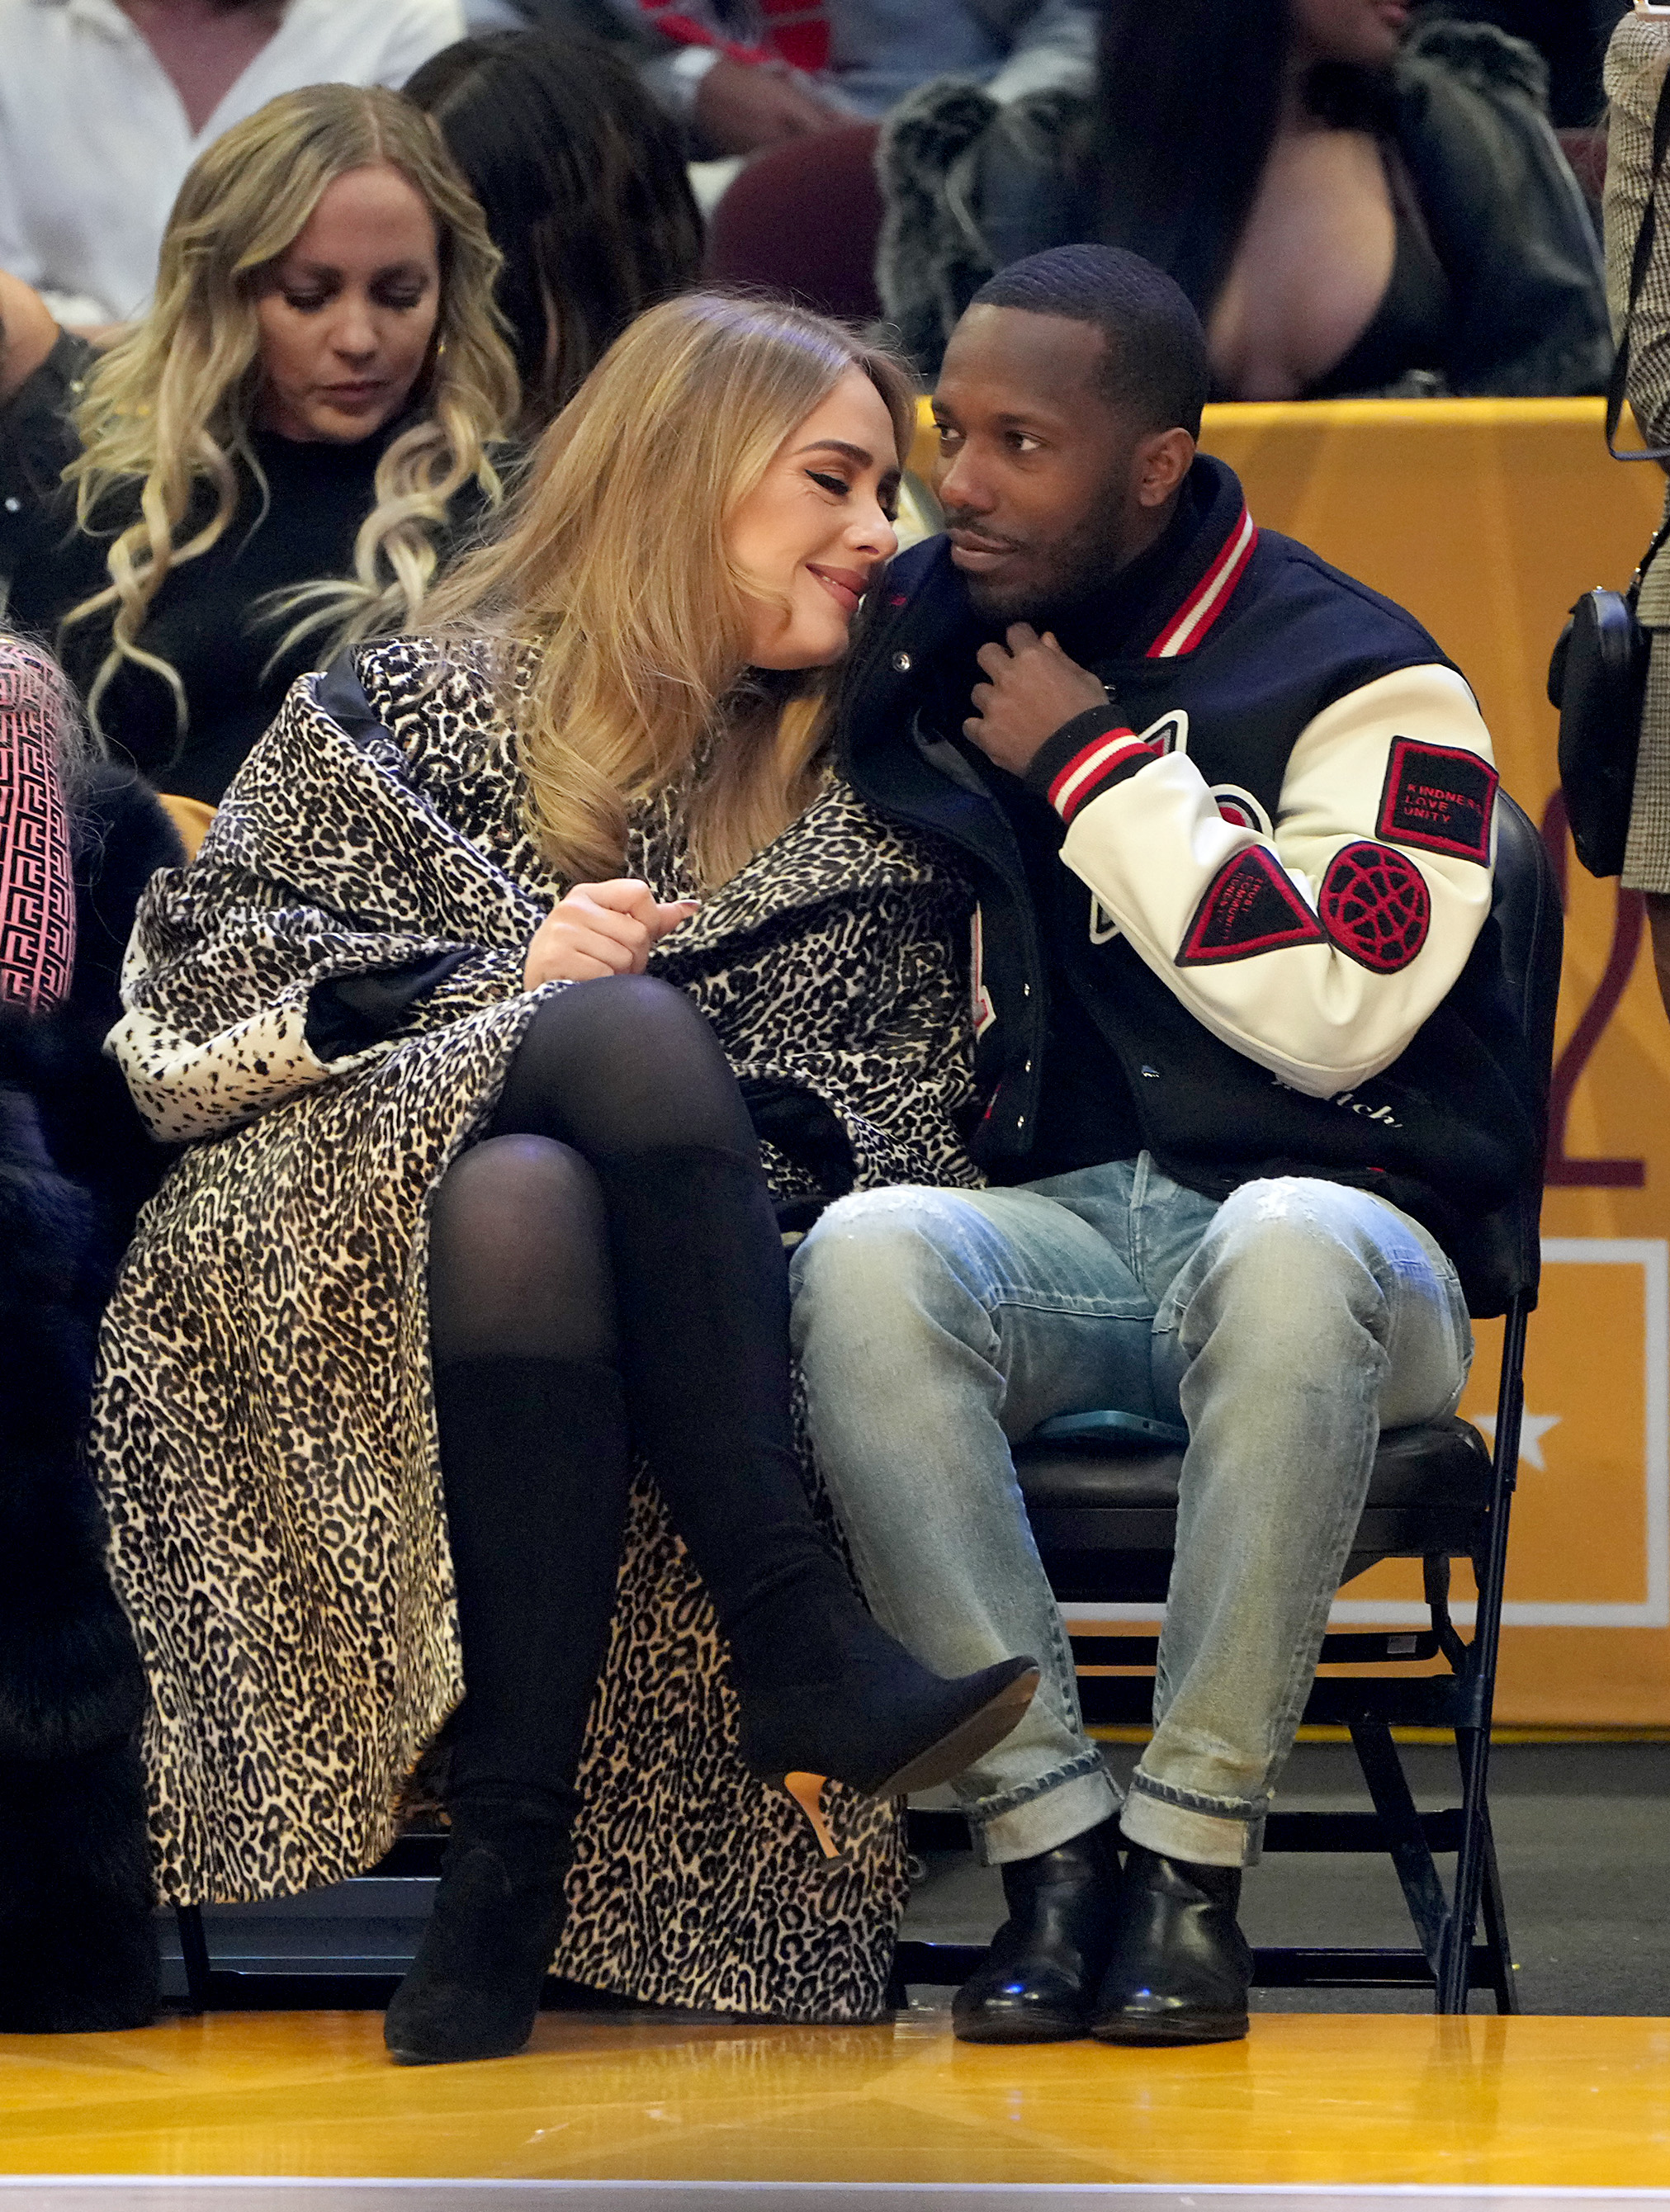 Adele and Rich Paul attend the 2022 NBA All-Star Game at Rocket Mortgage Fieldhouse on February 20, 2022 in Cleveland, Ohio | Source: Getty Images